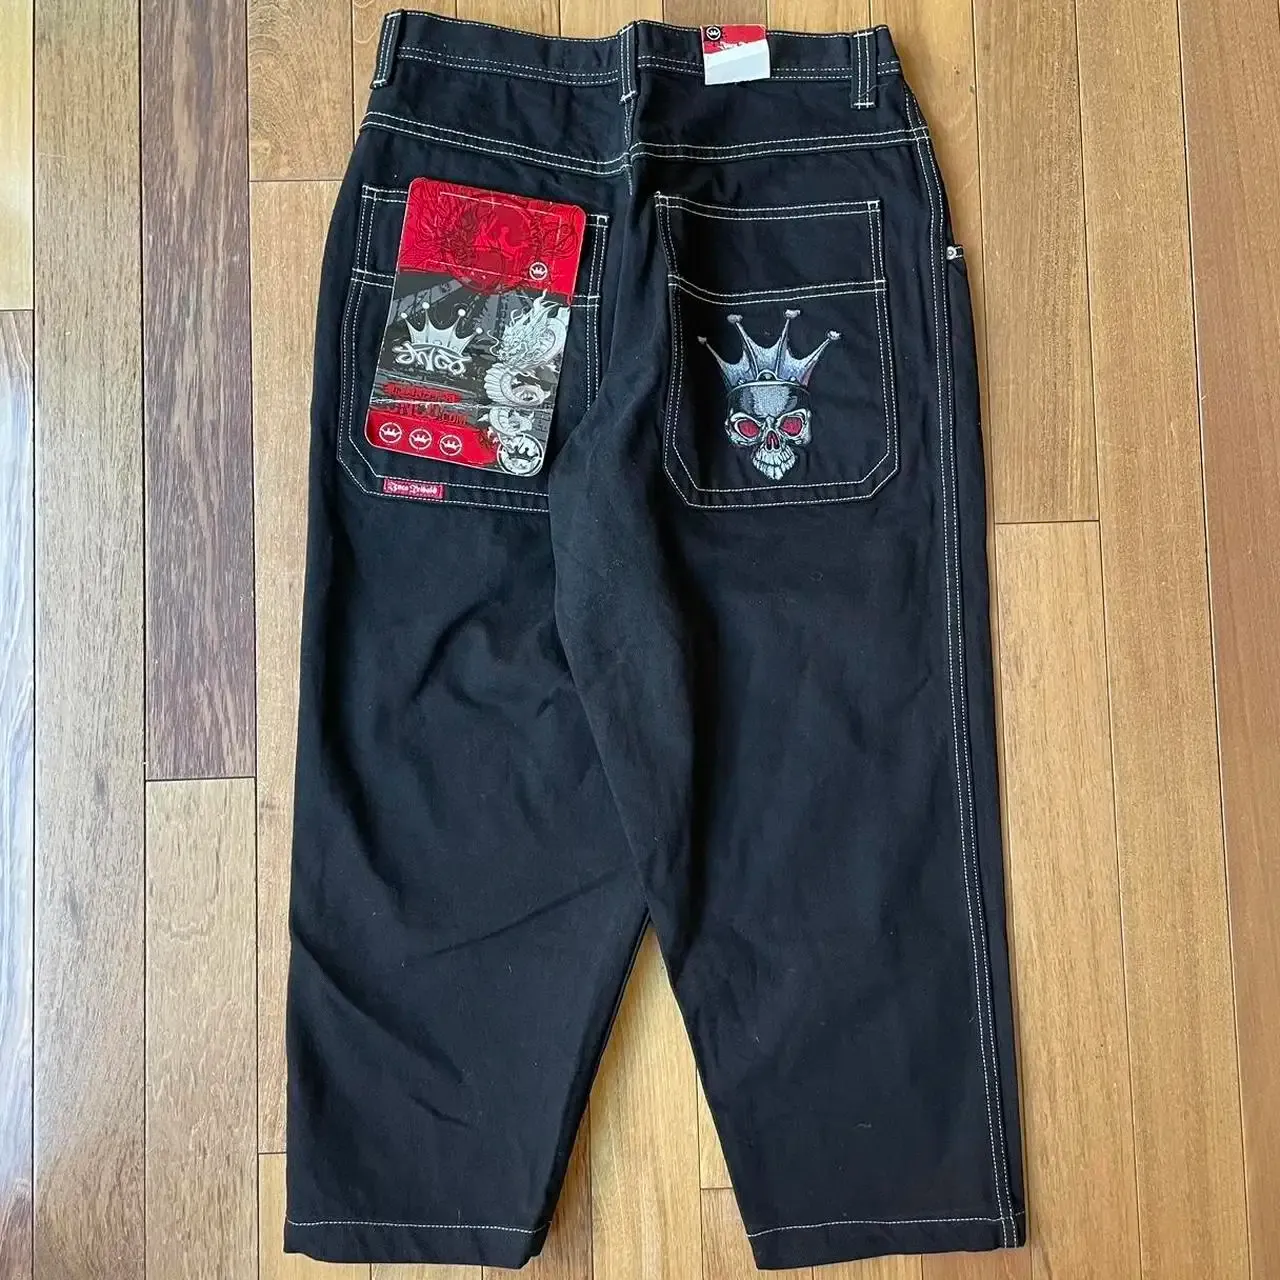 Jeans JNCO Streetwear Wear New Men's Black and White Jeans Crazy Rare Vintage Skull Embroiders Loose Cow Y2K Harajuku Gothic Pants